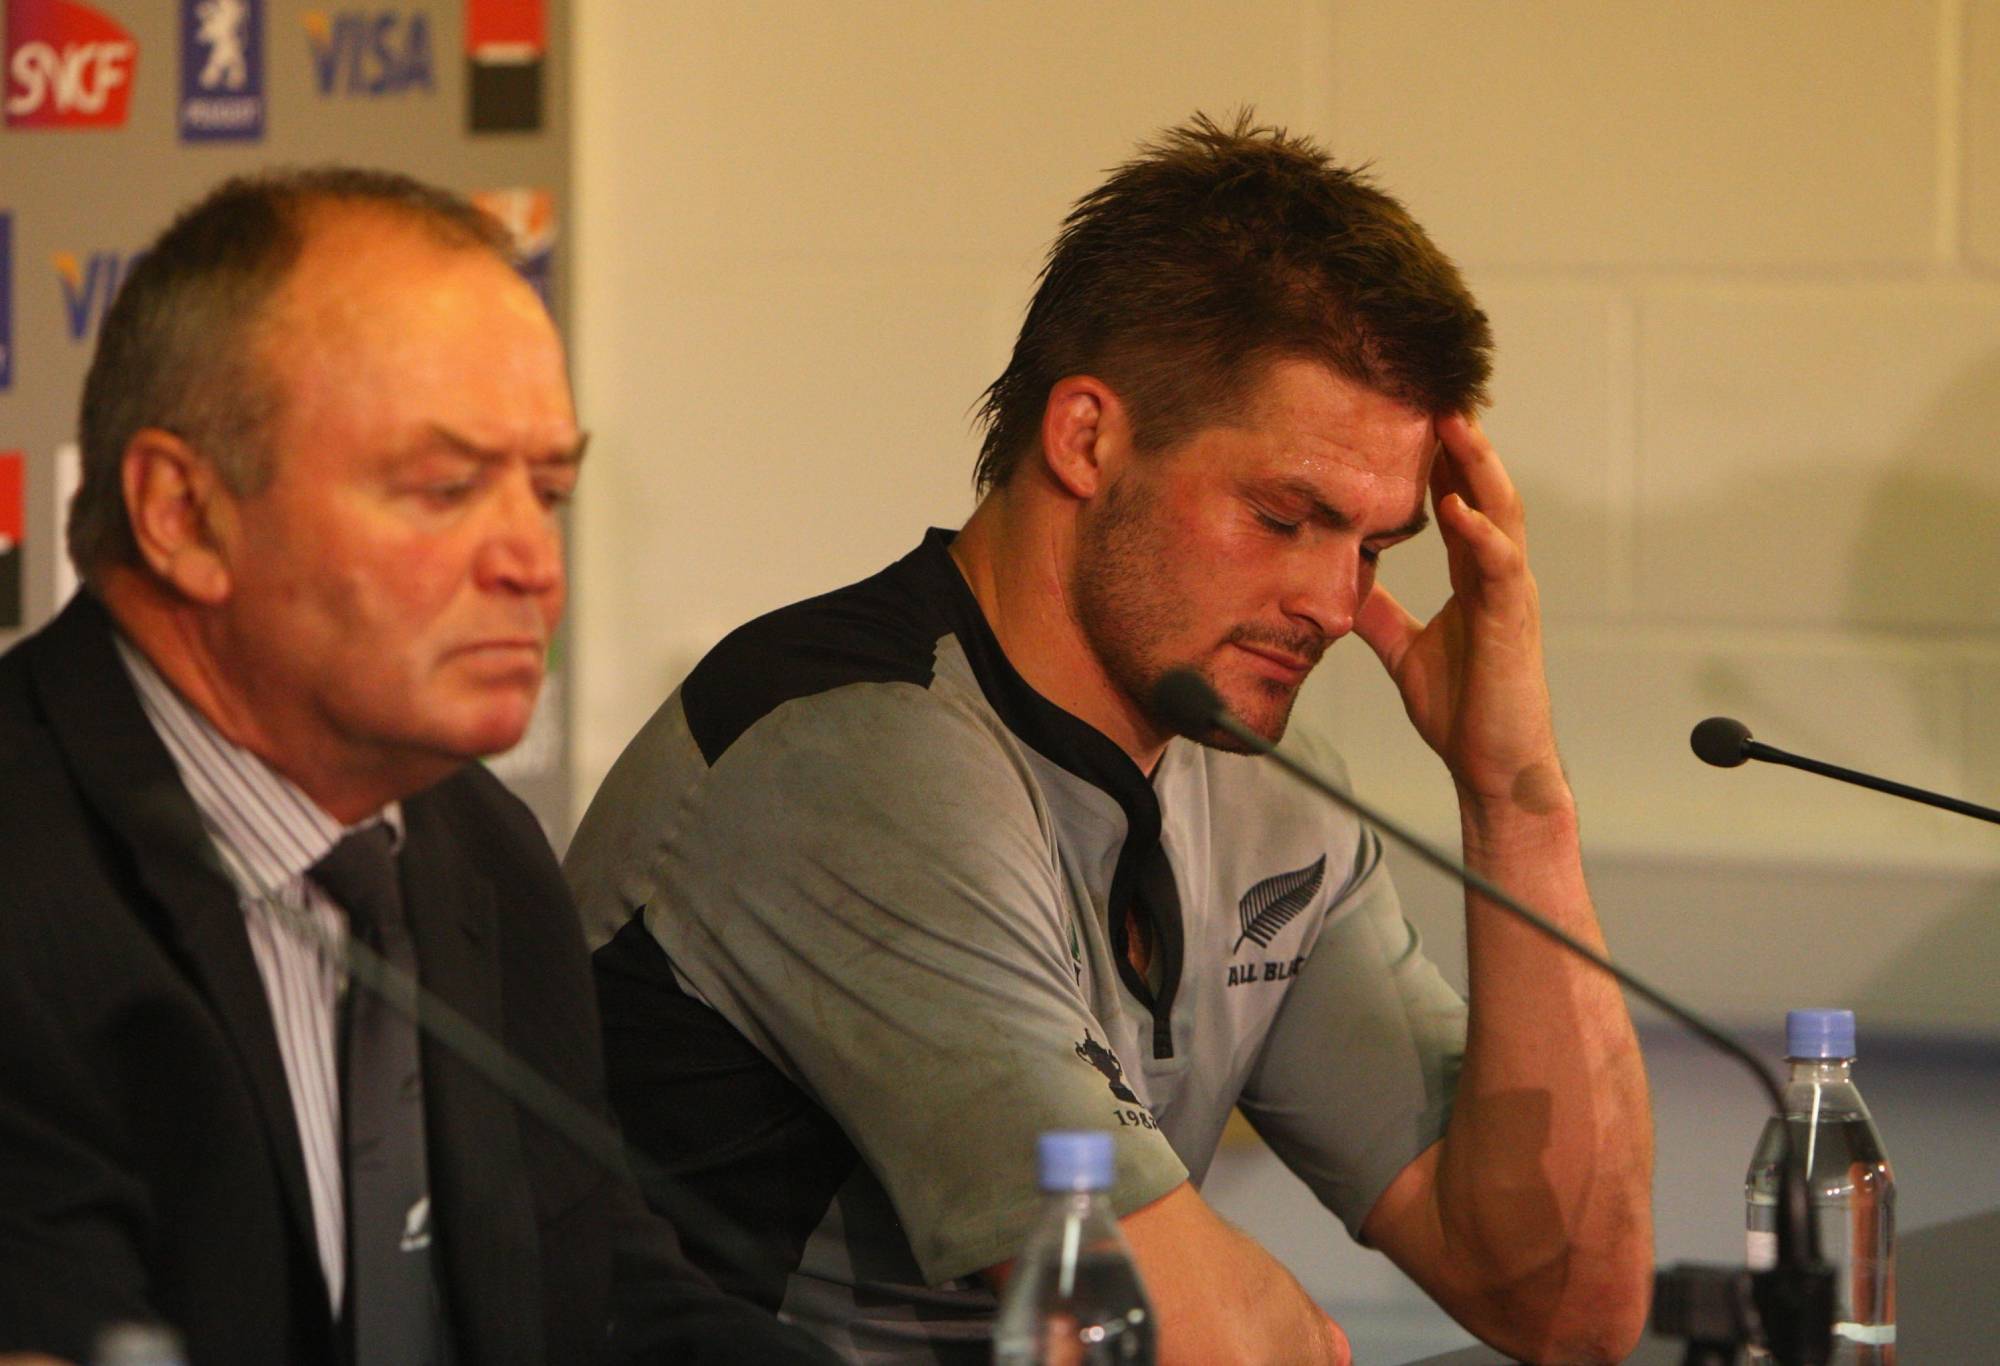 Richie McCaw of New Zealand is dejected at the post-match press conference during the Quarter Final of the Rugby World Cup 2007 match between New Zealand and France at the Millennium Stadium on October 6, 2007 in Cardiff, United Kingdom. (Photo by Stu Forster/Getty Images)